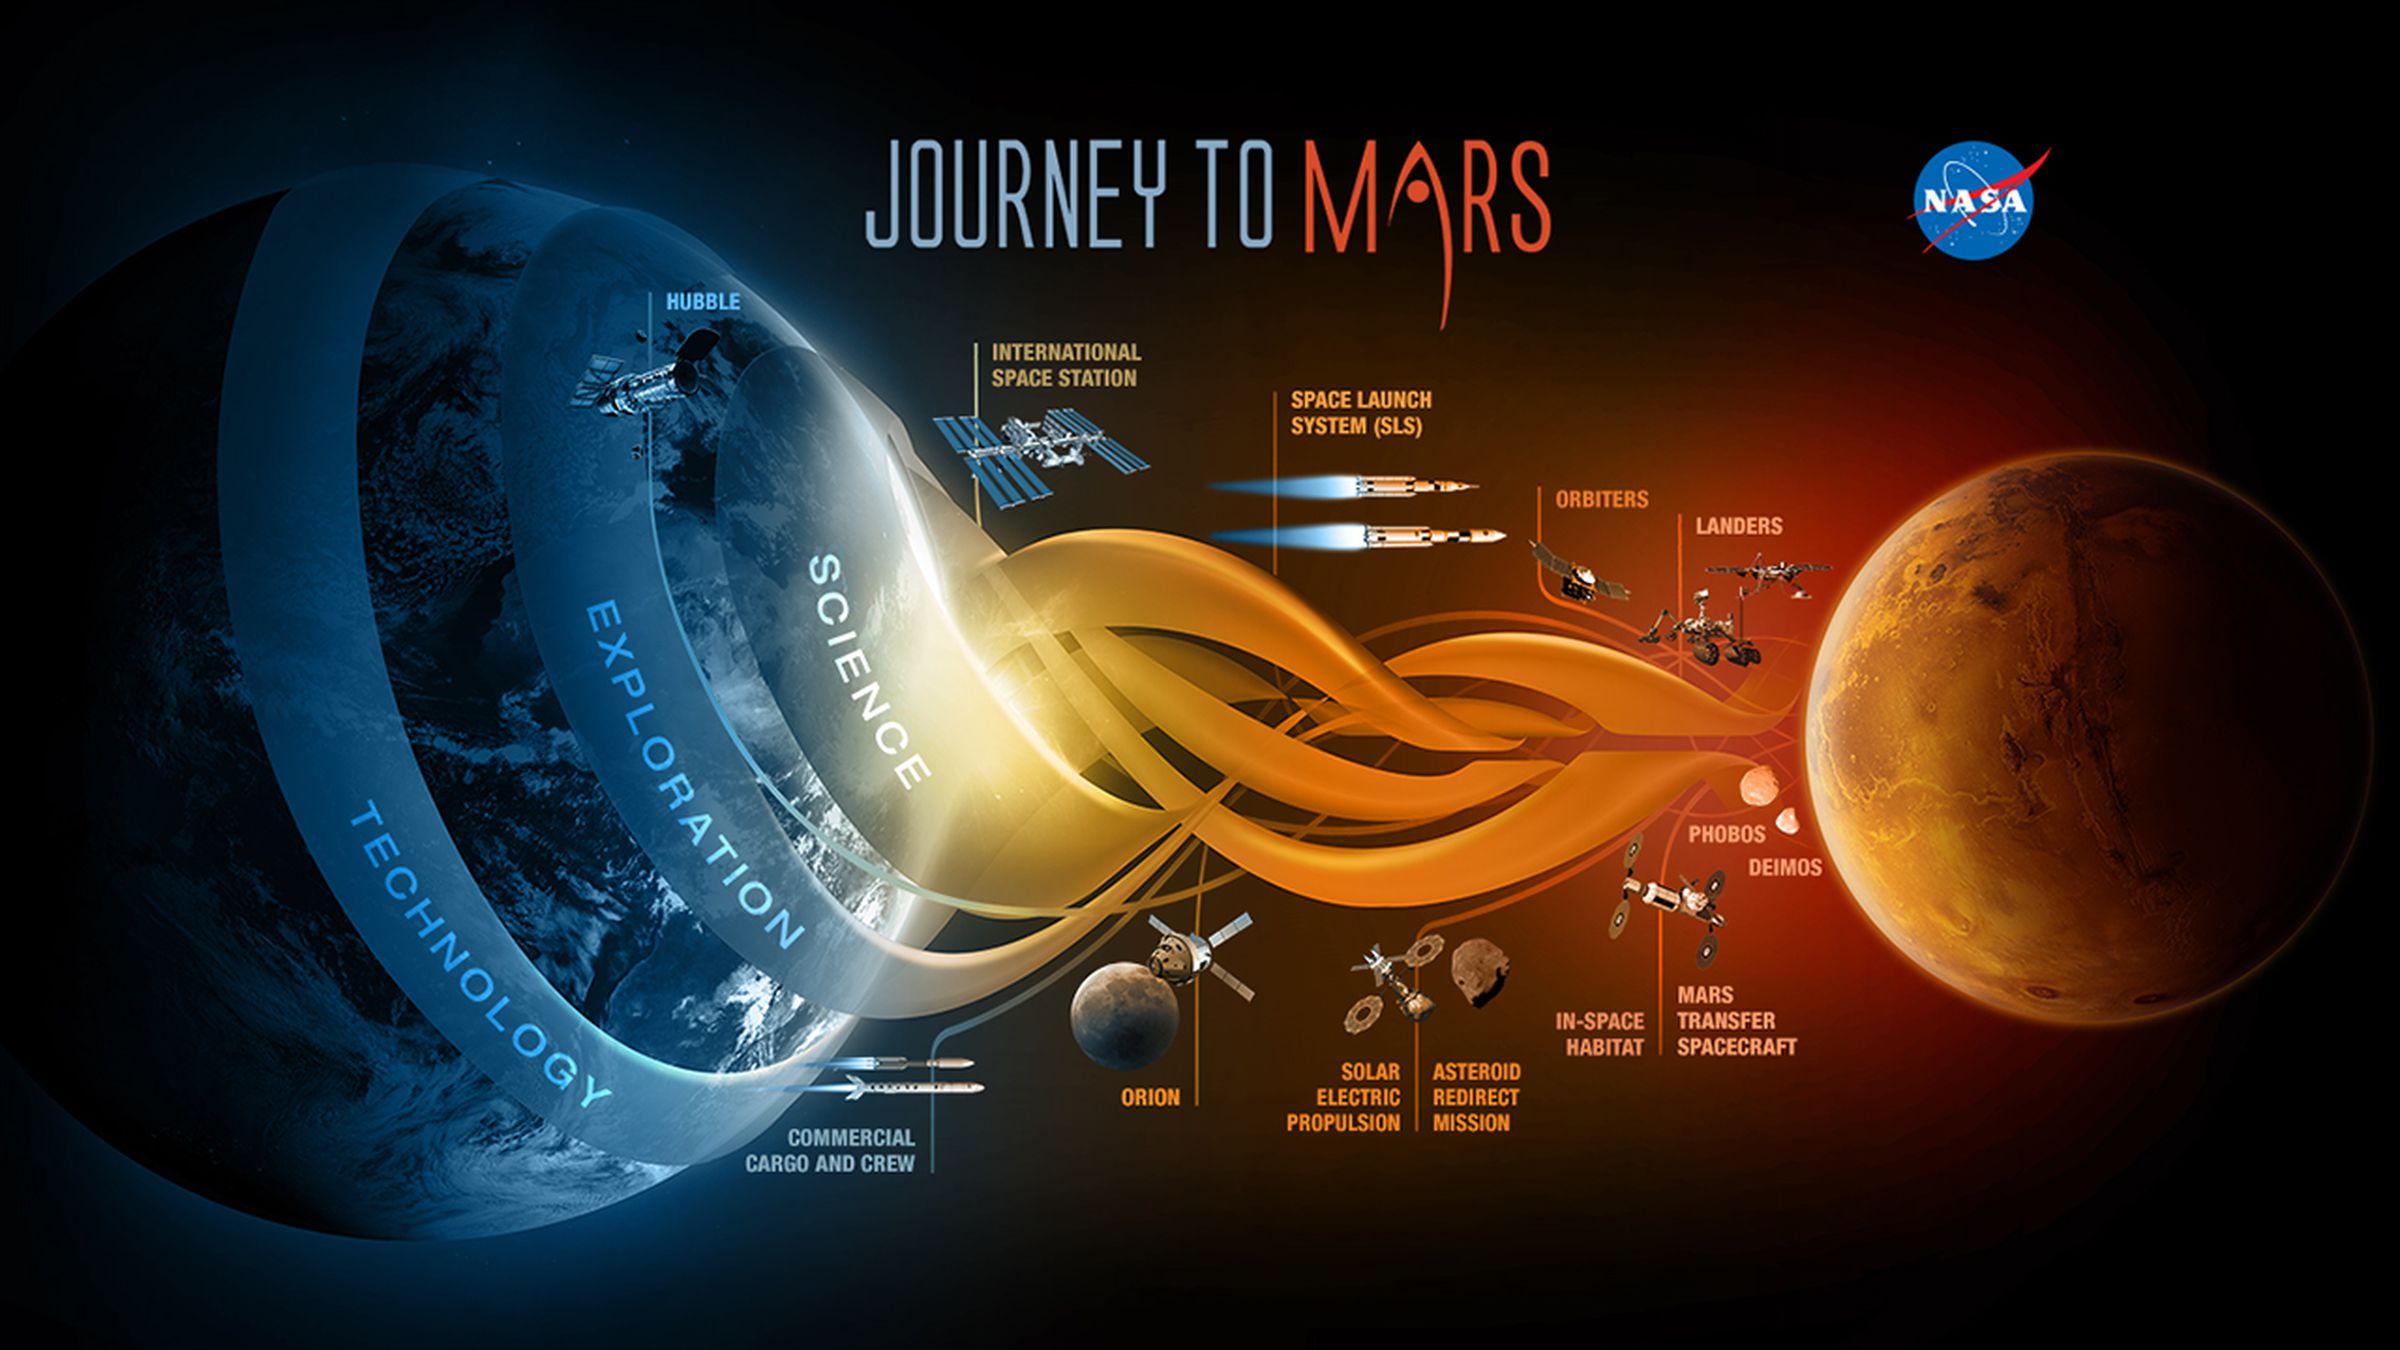 NASA’s infographic for the Journey to Mars.